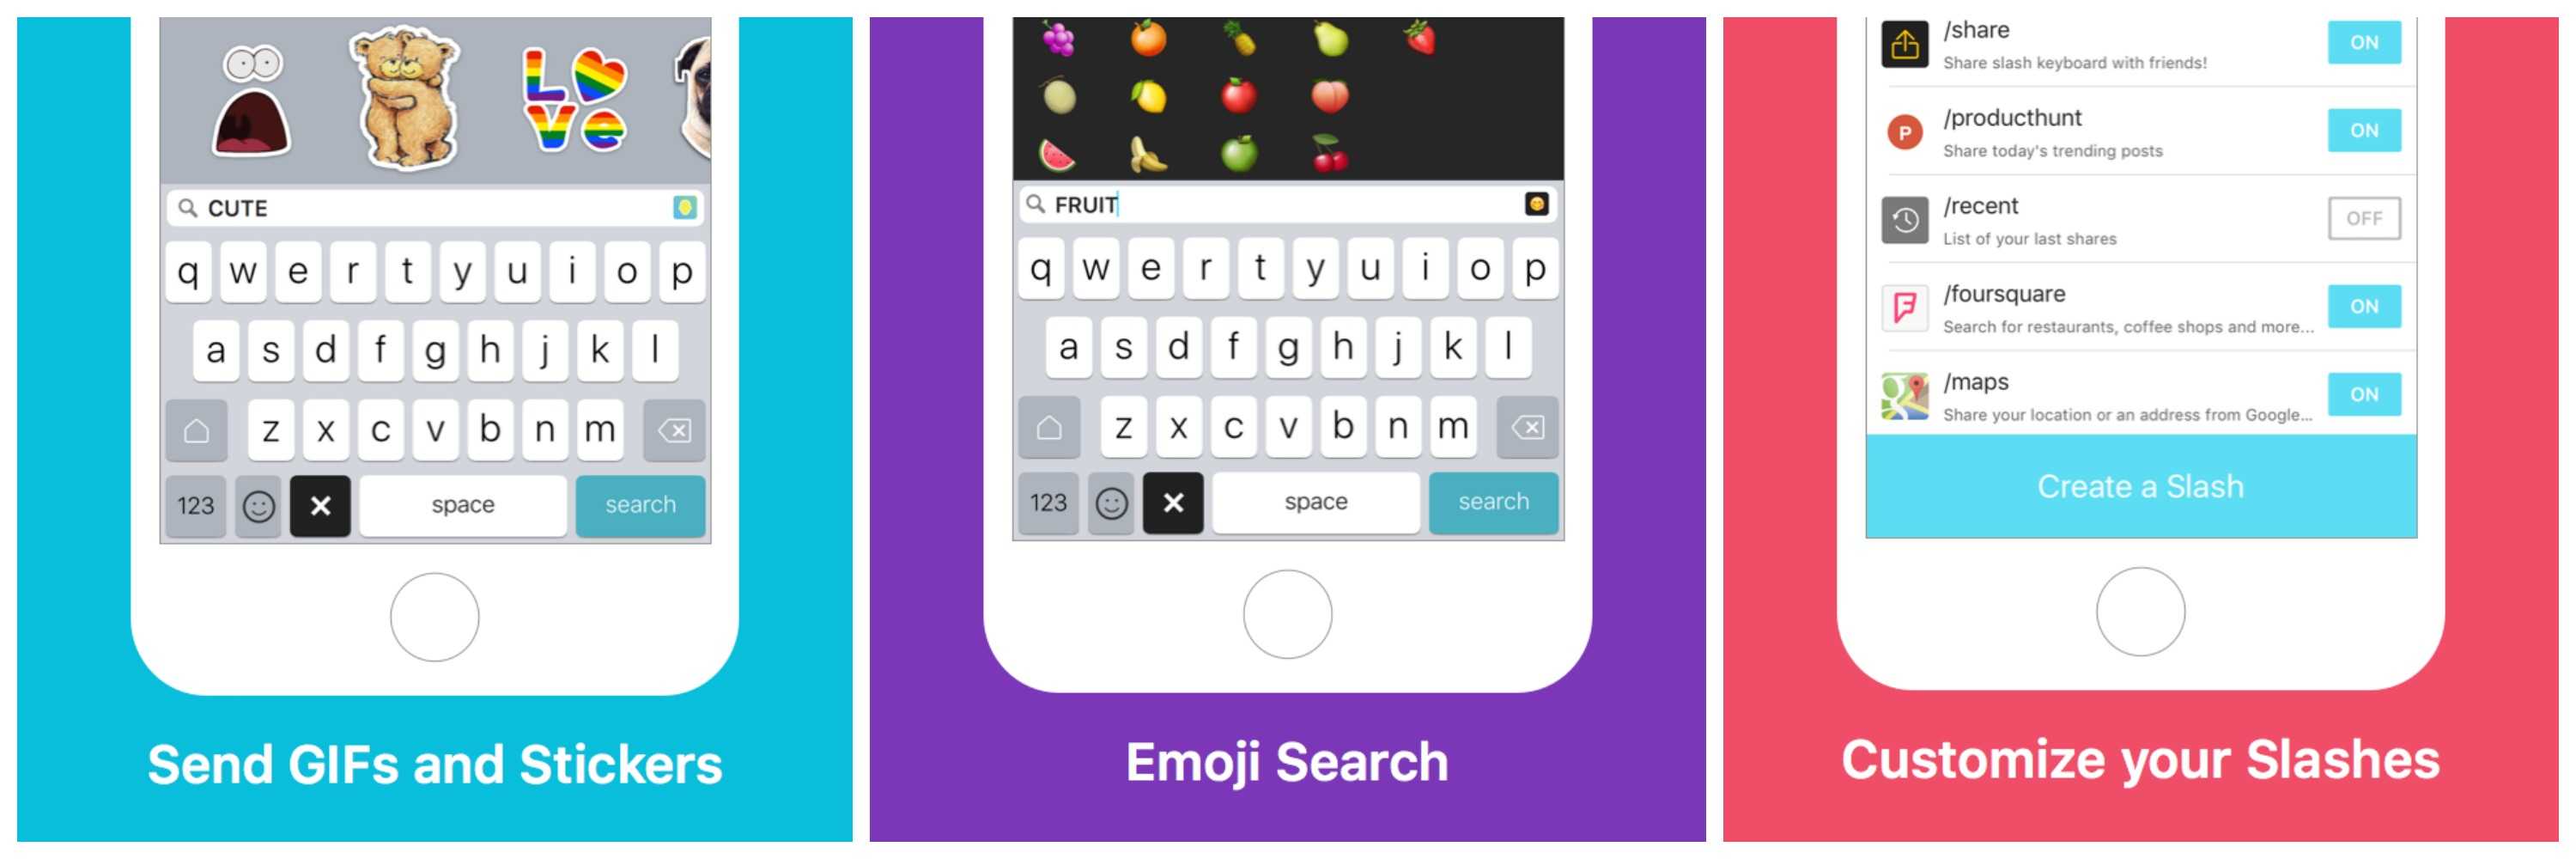 Slash Keyboard makes it easy to add GIFs, emojis and just about anything else to your messages.